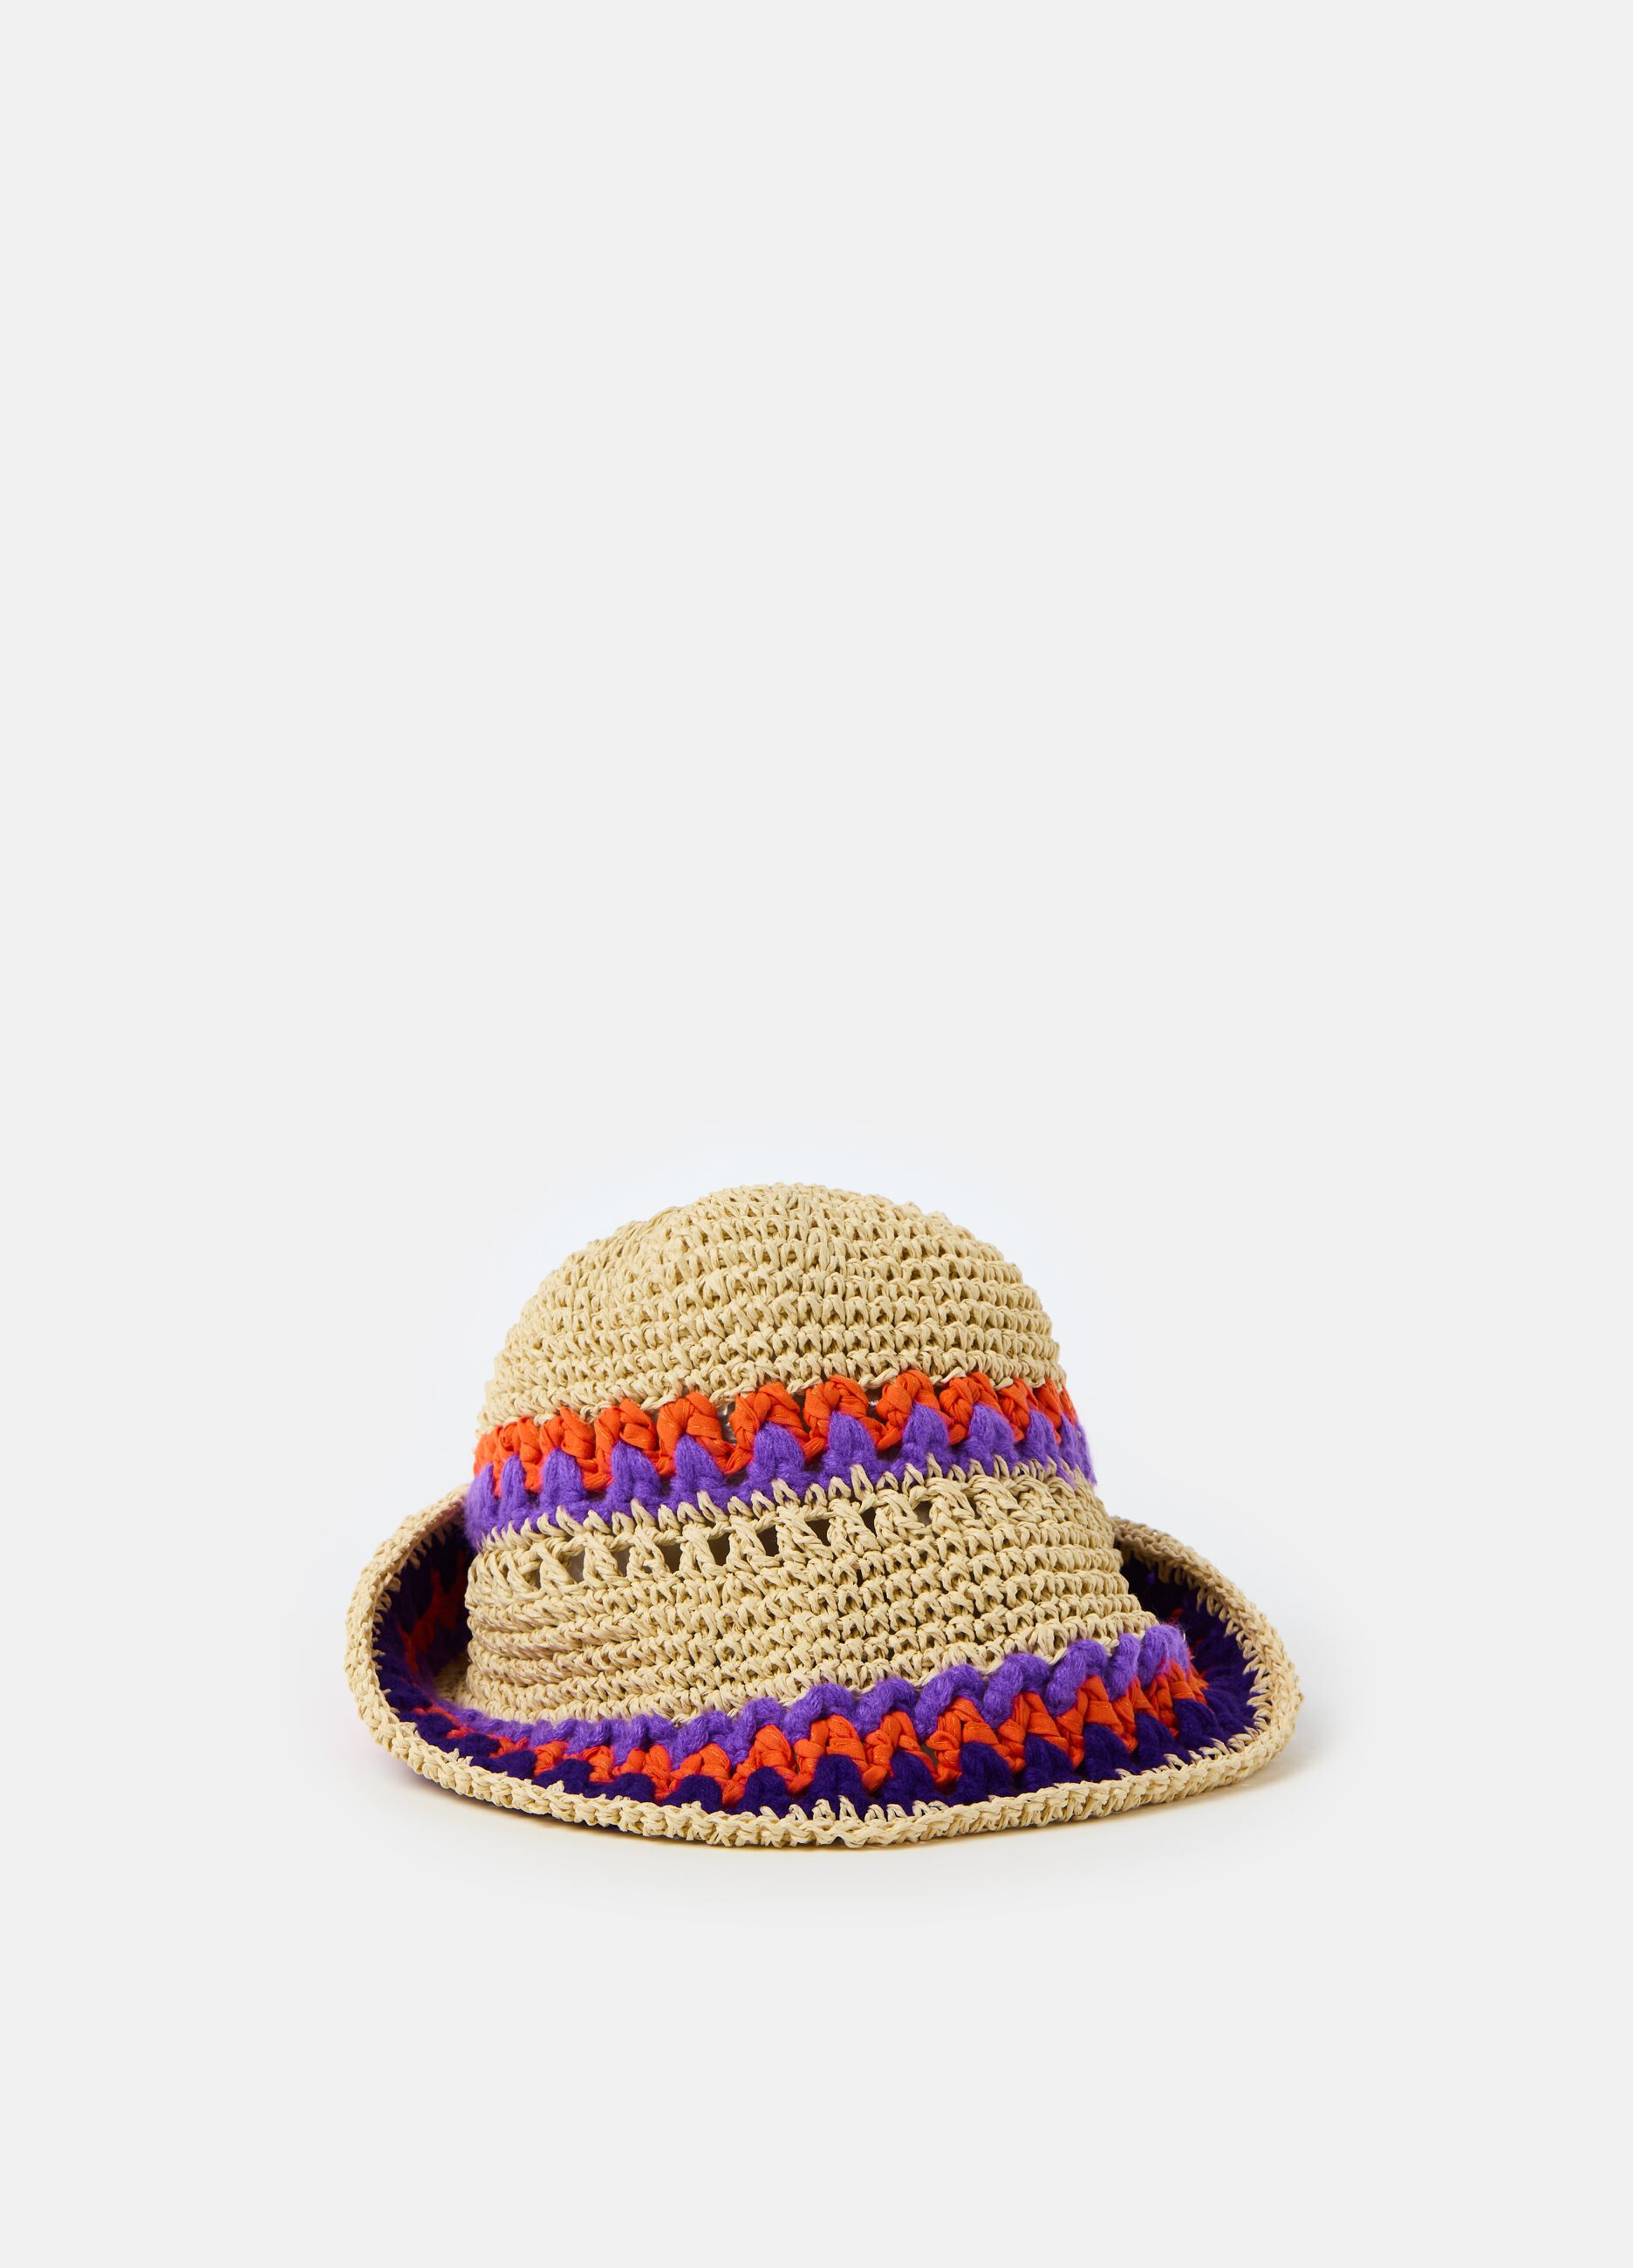 Fishing hat with cotton inserts